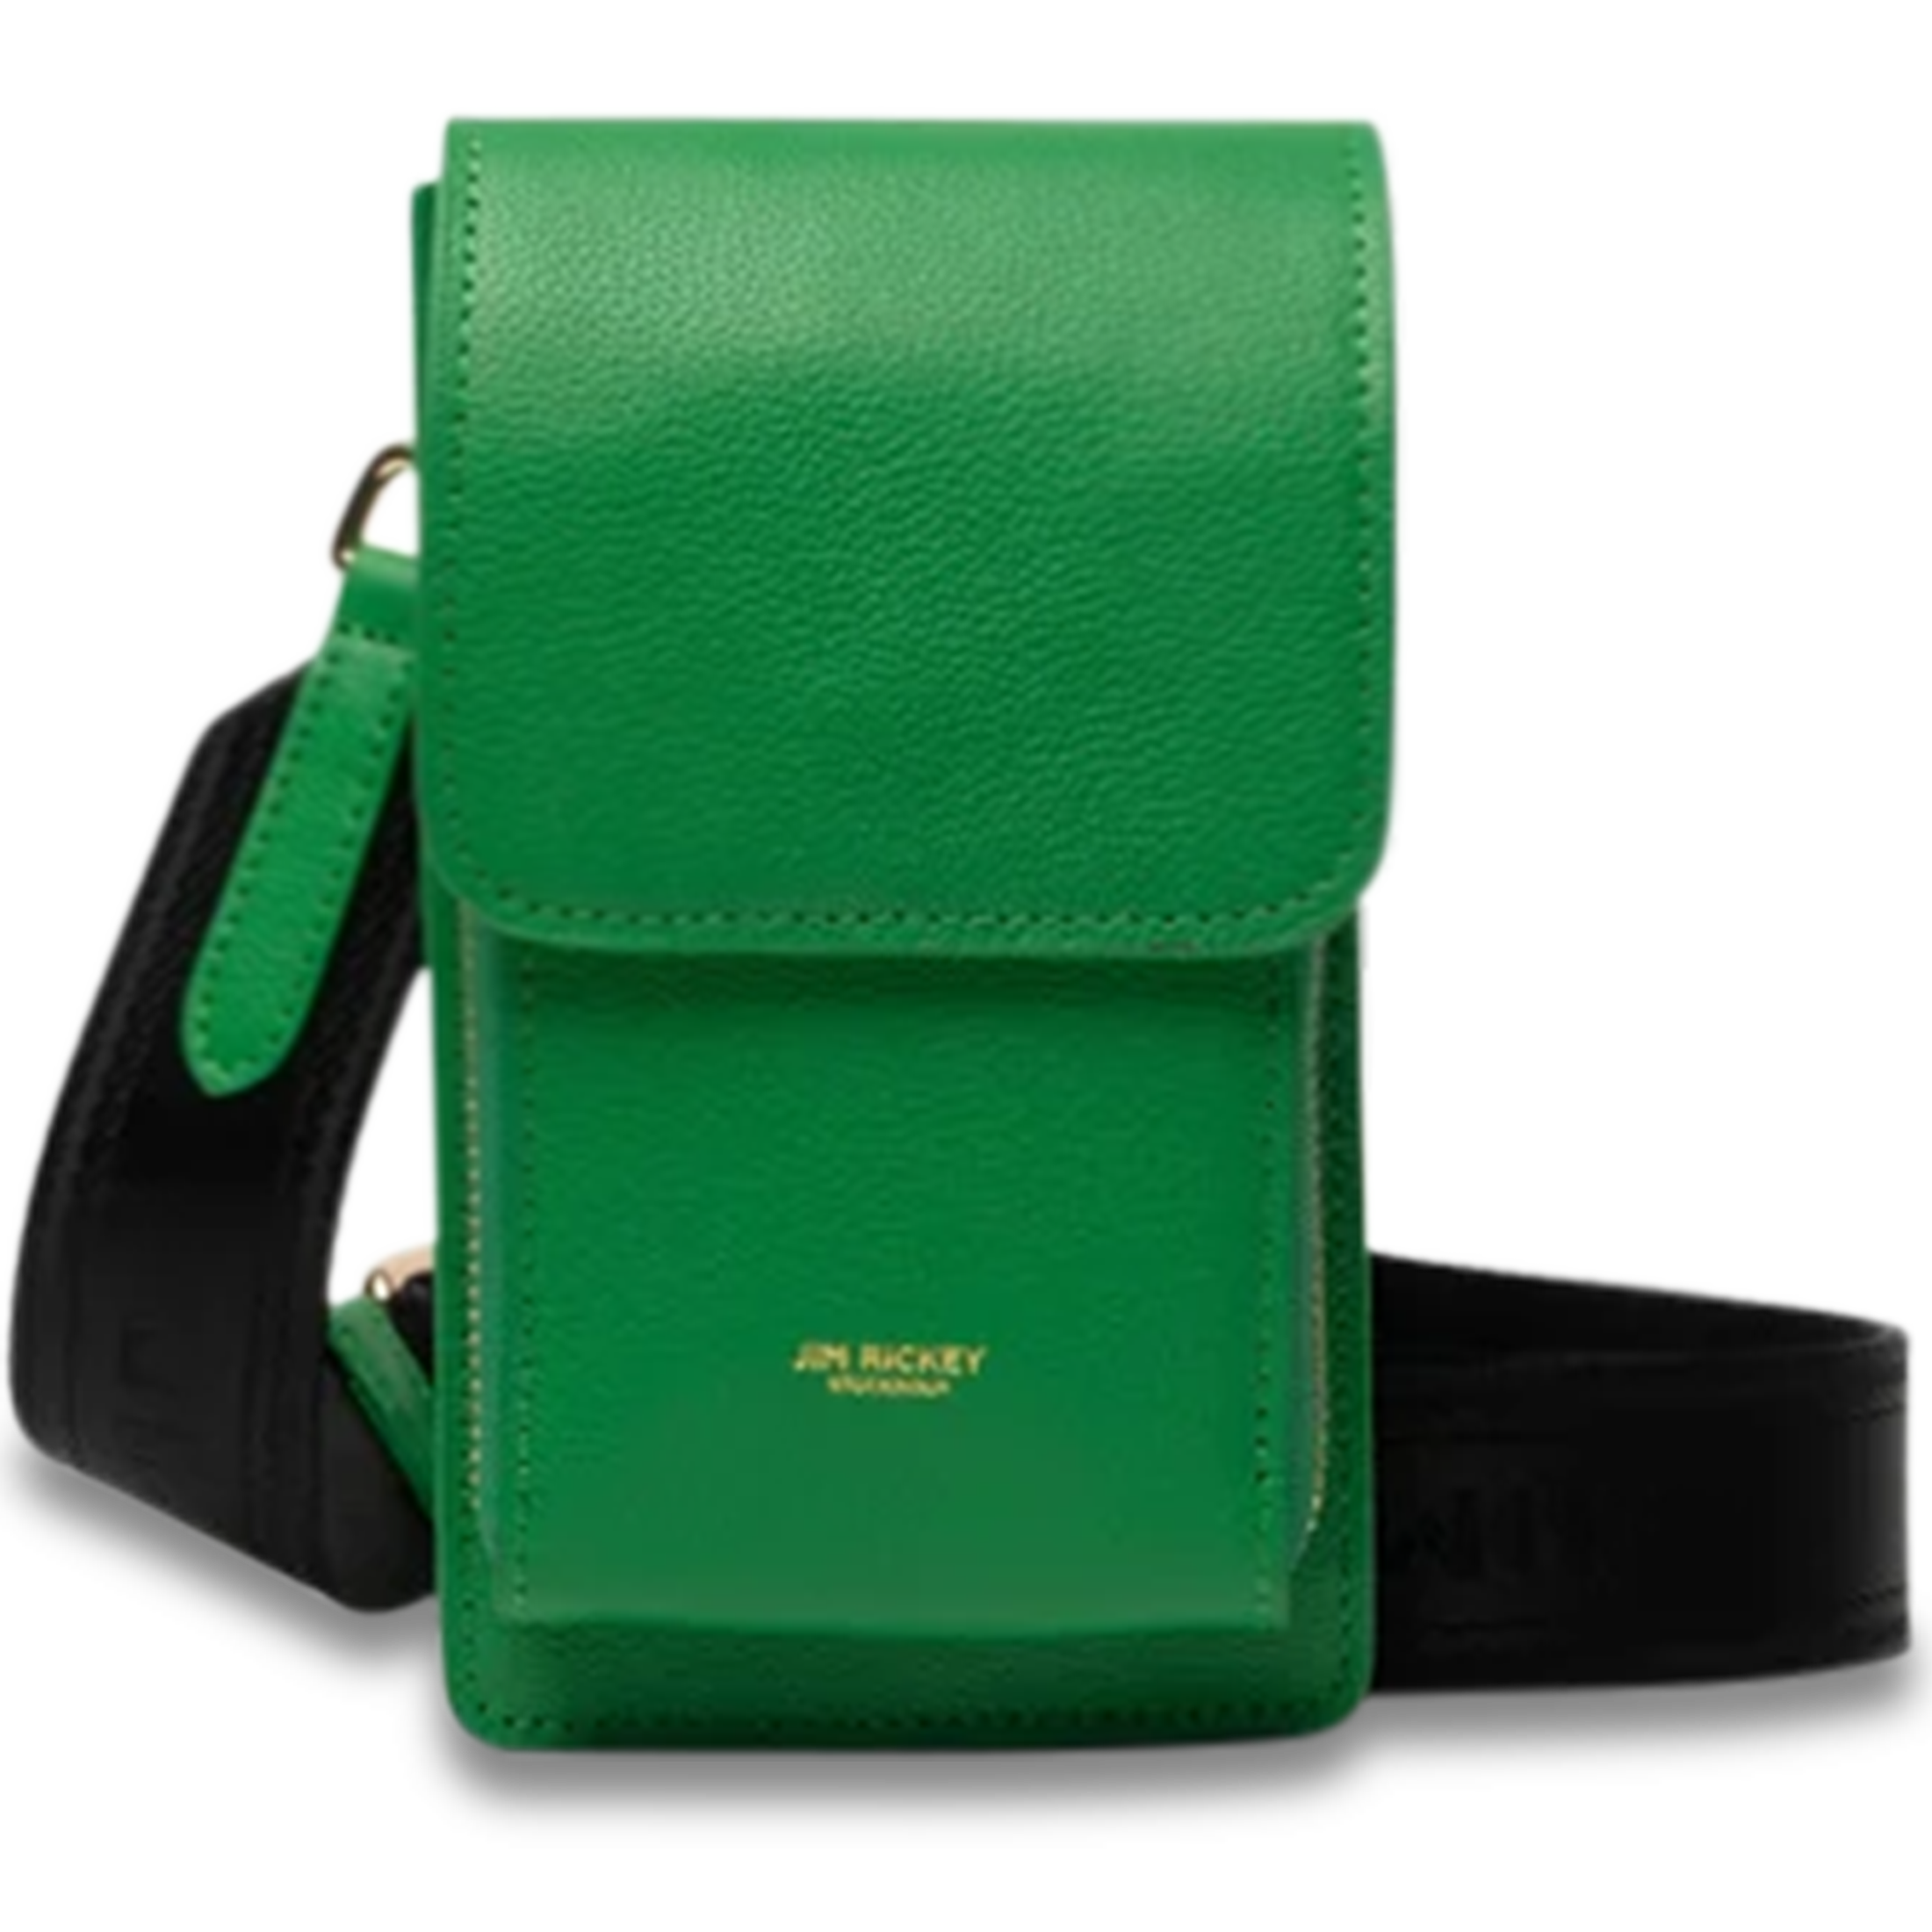 Alex - Green Grained Leather